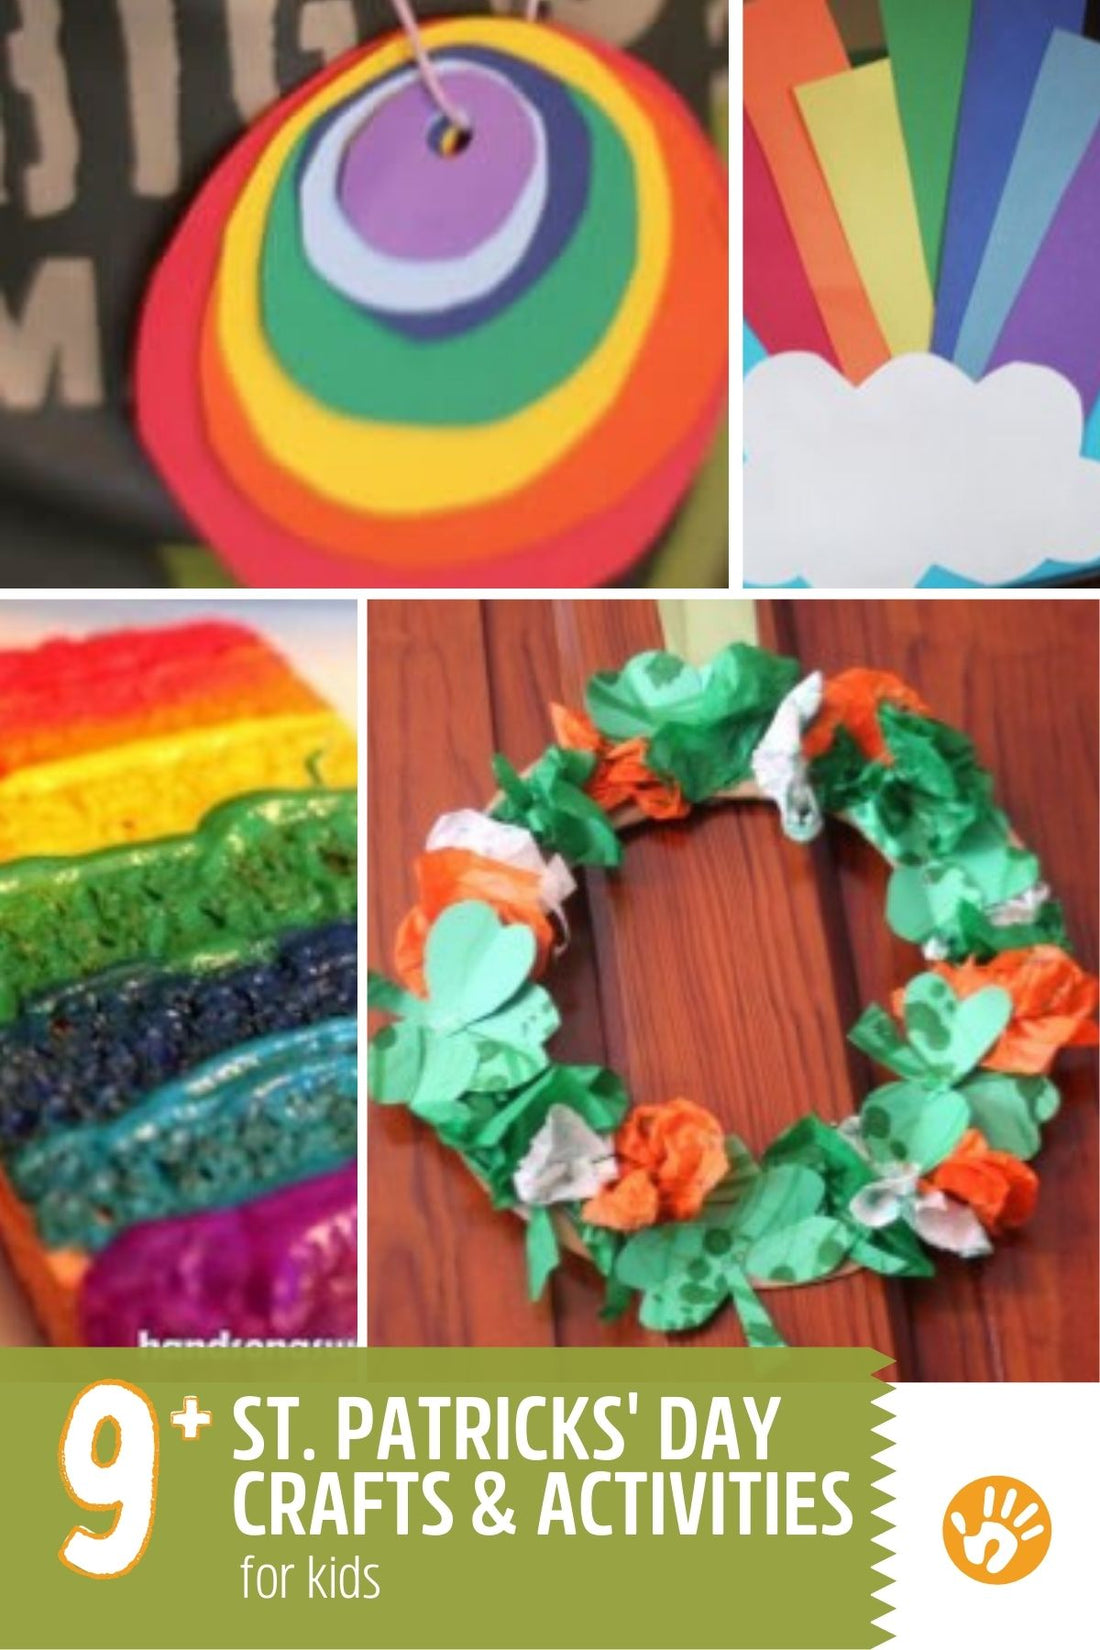 9+ St. Patrick’s Day Crafts & Activities for Kids